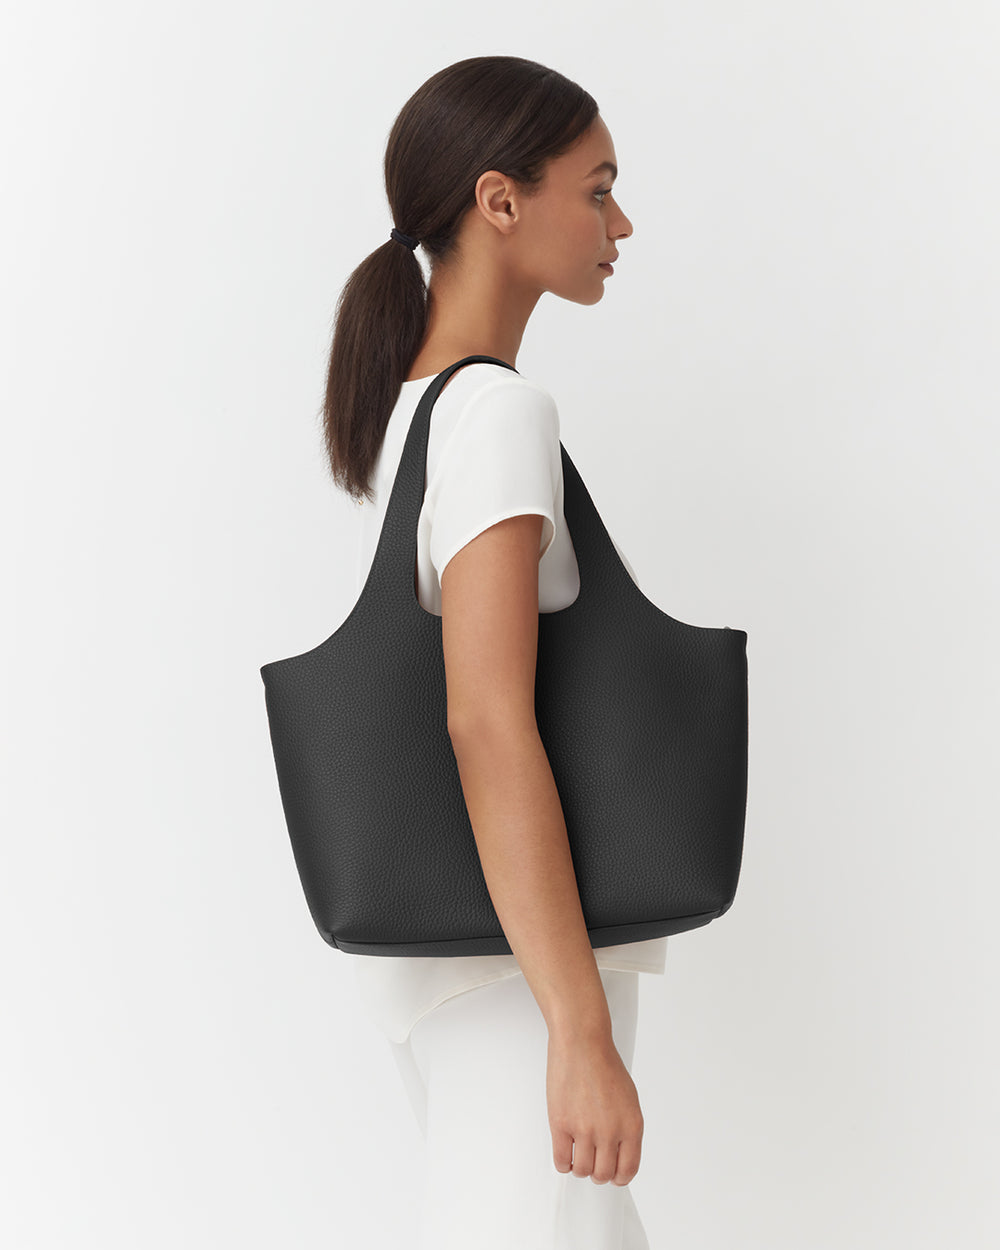 Woman with ponytail carrying a large tote bag on her shoulder, facing away.